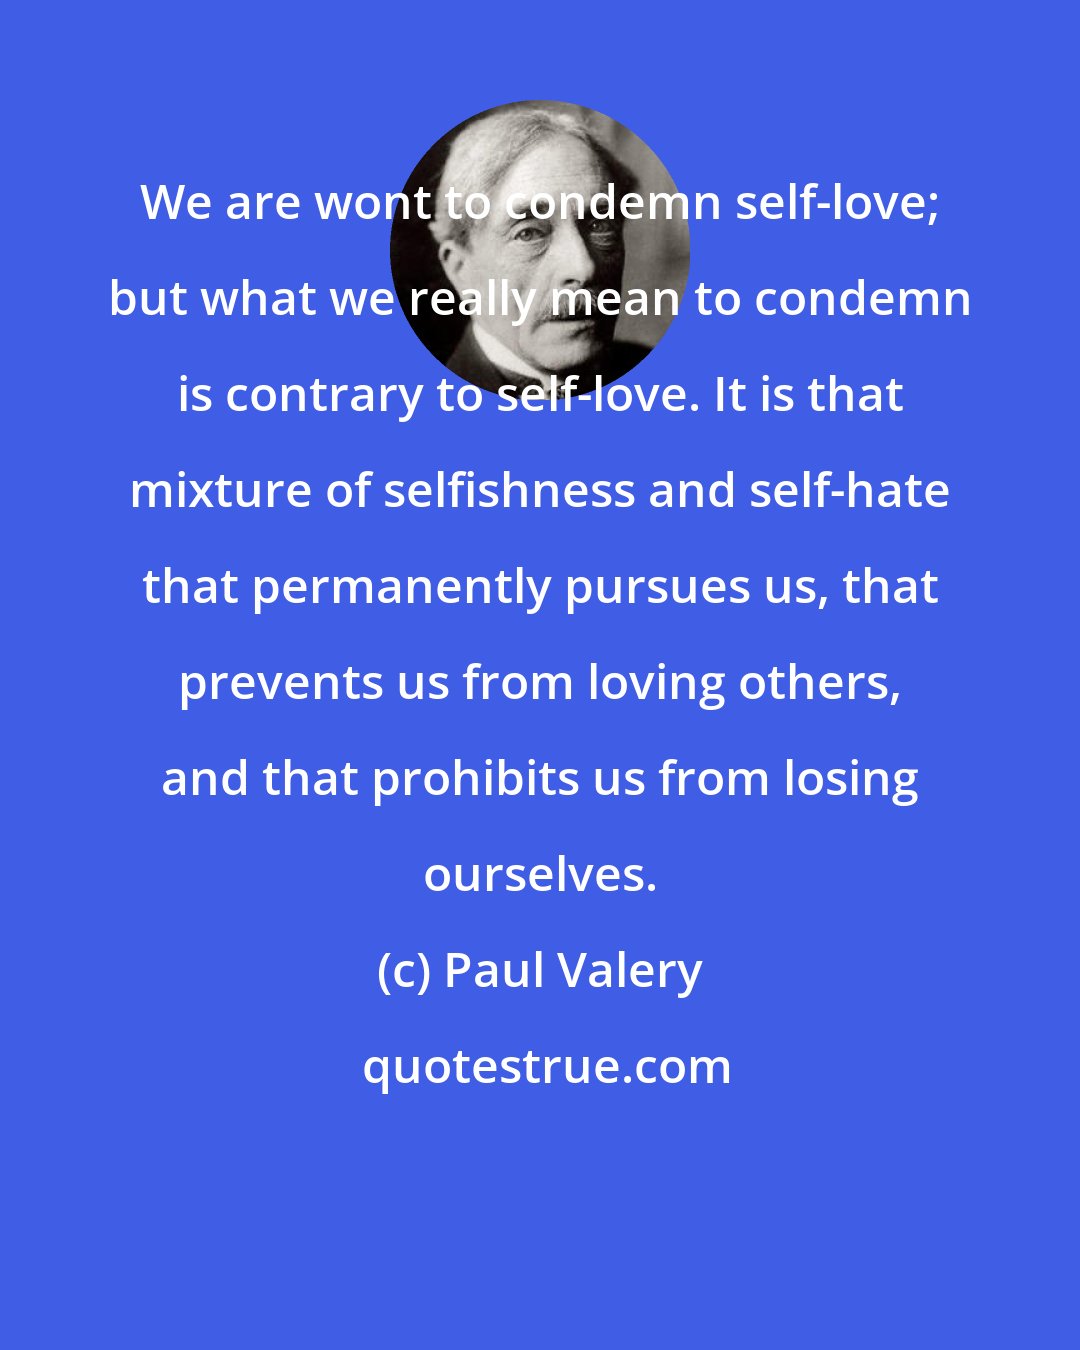 Paul Valery: We are wont to condemn self-love; but what we really mean to condemn is contrary to self-love. It is that mixture of selfishness and self-hate that permanently pursues us, that prevents us from loving others, and that prohibits us from losing ourselves.